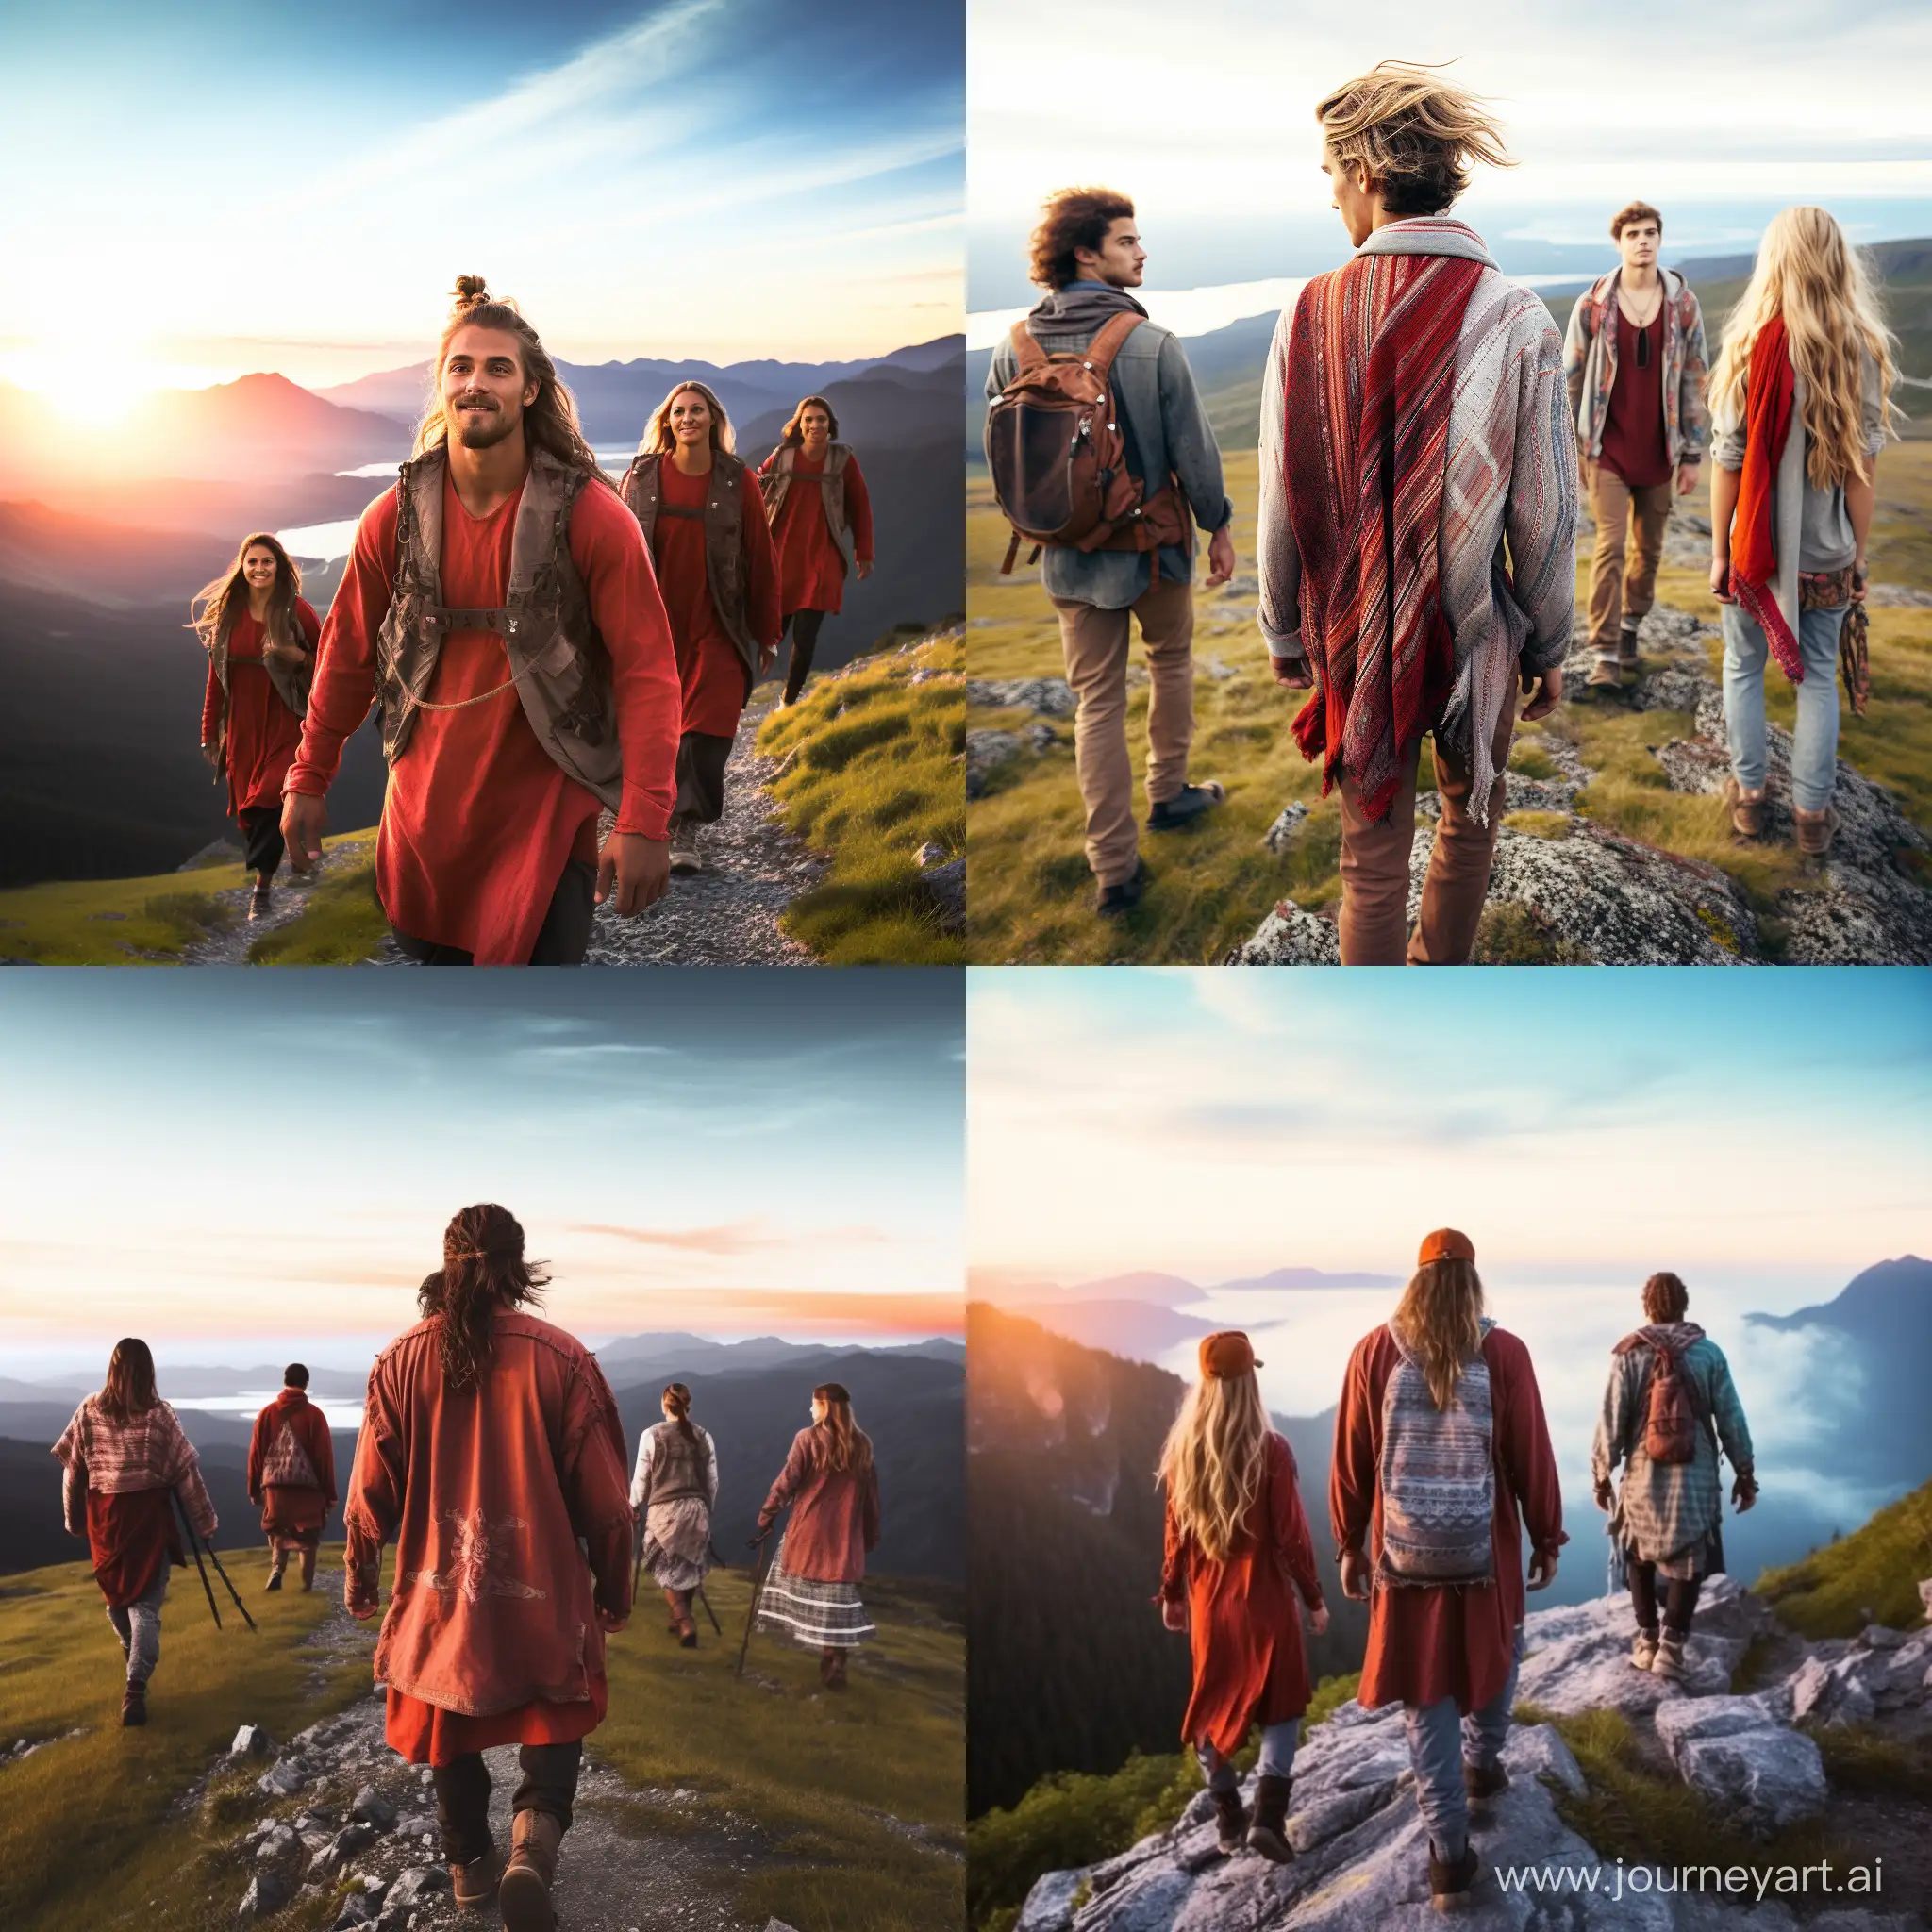 elevated view of 4 confident alpha teens dressed in rugged outdoor mountain men and women (2 men + 2 women) with shamanic clothing walking towards something important but in a calm connection with God way.  red dawn vibes, back facing camera walking away confidently.. 
